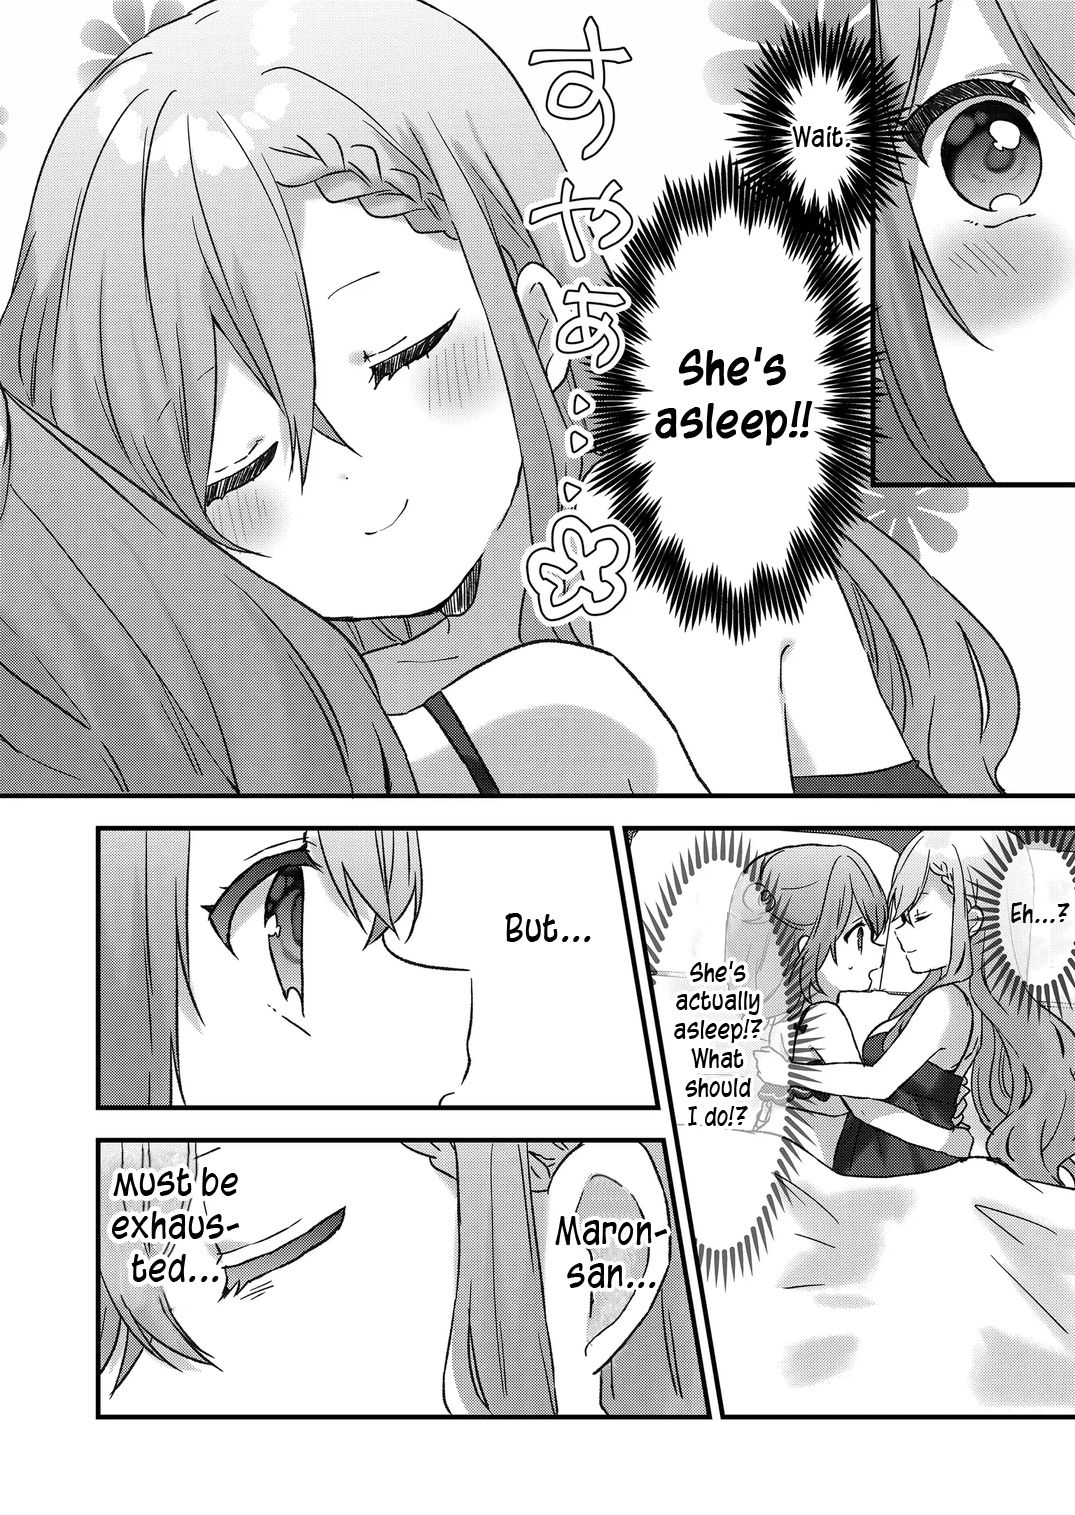 Failed University Exams I am Trash and Life is Hard, so I Tried Calling an Onee-san at Night - chapter 18 - #5